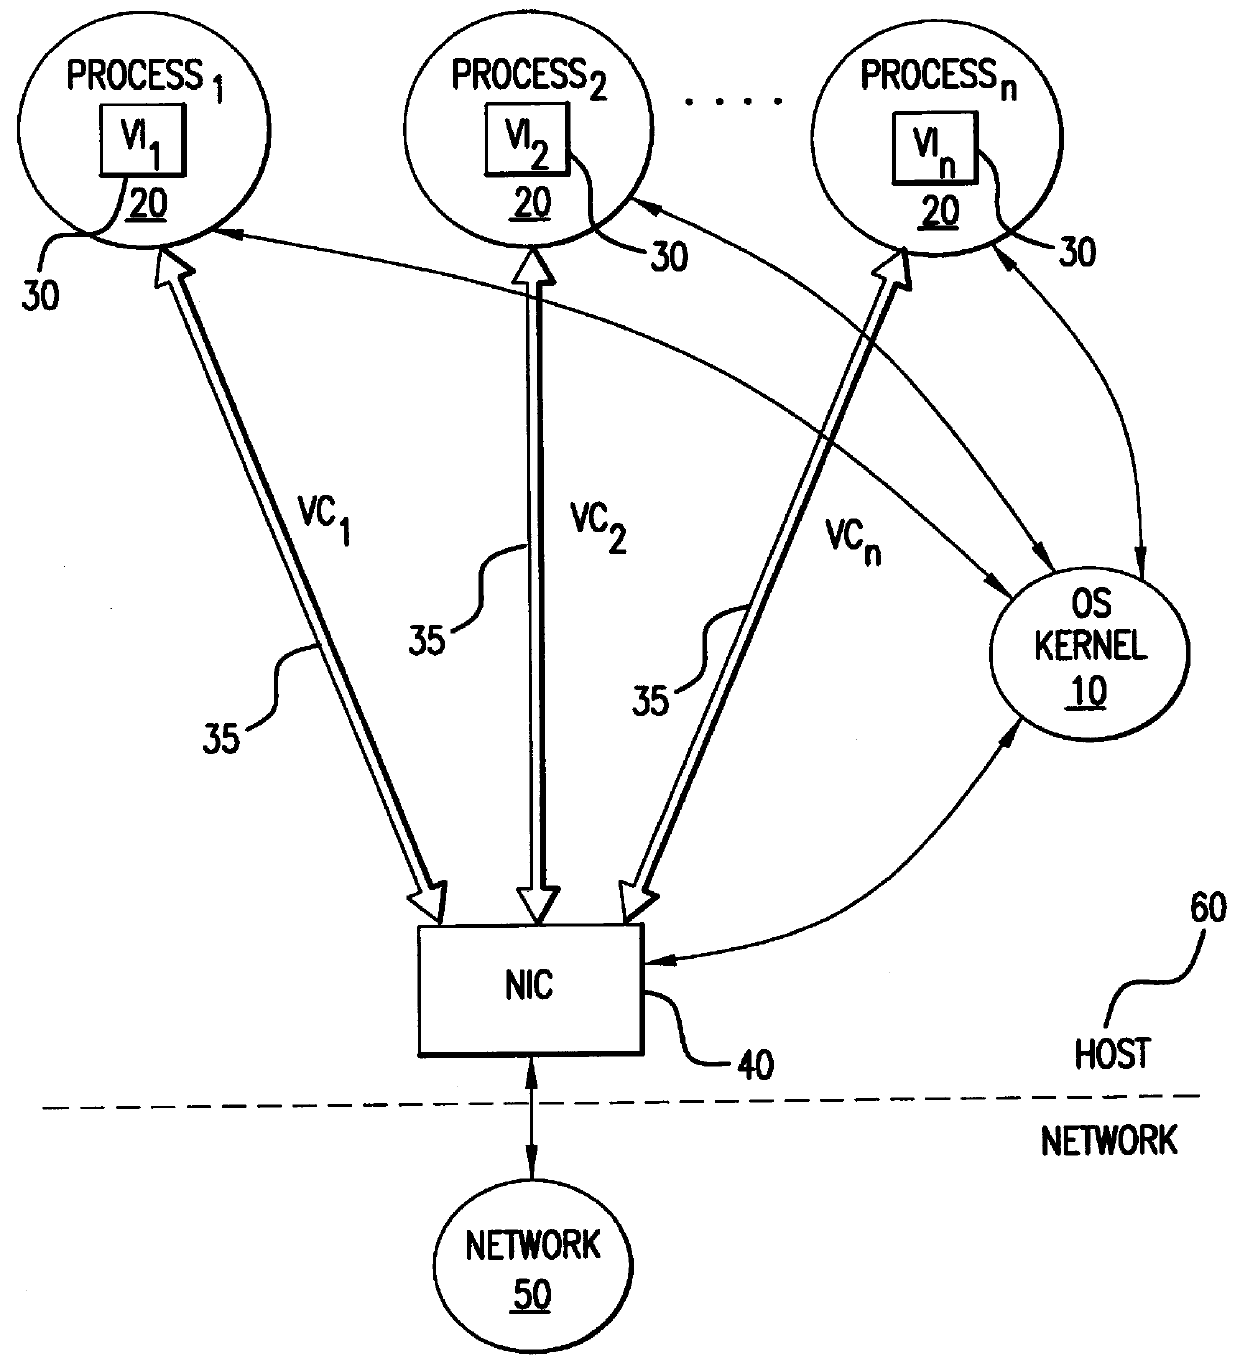 Hierarchical interrupt structure for event notification on multi-virtual circuit network interface controller